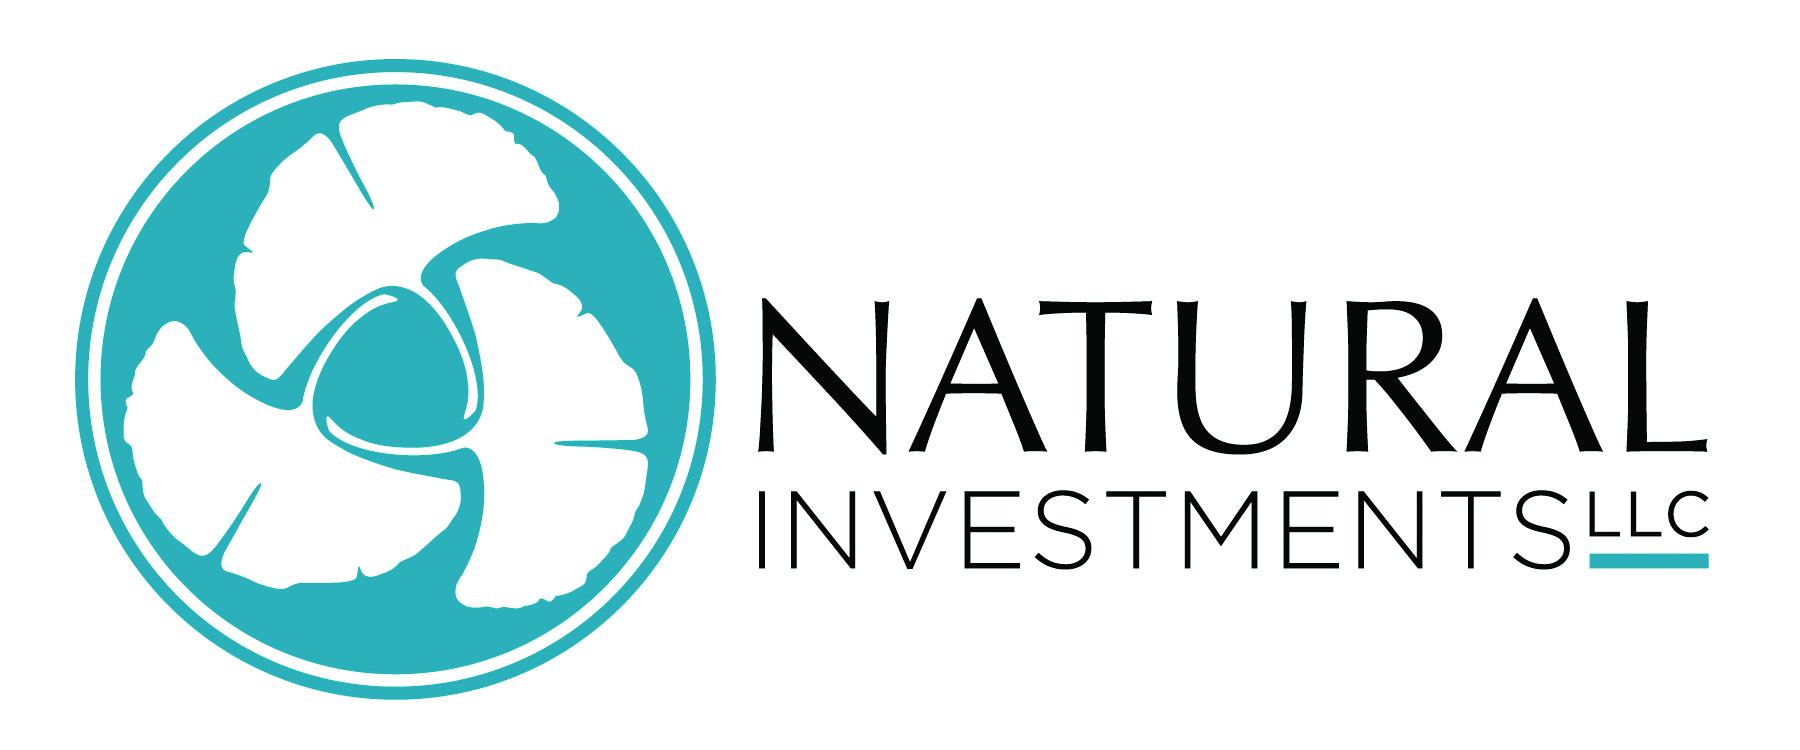 Natural Investments